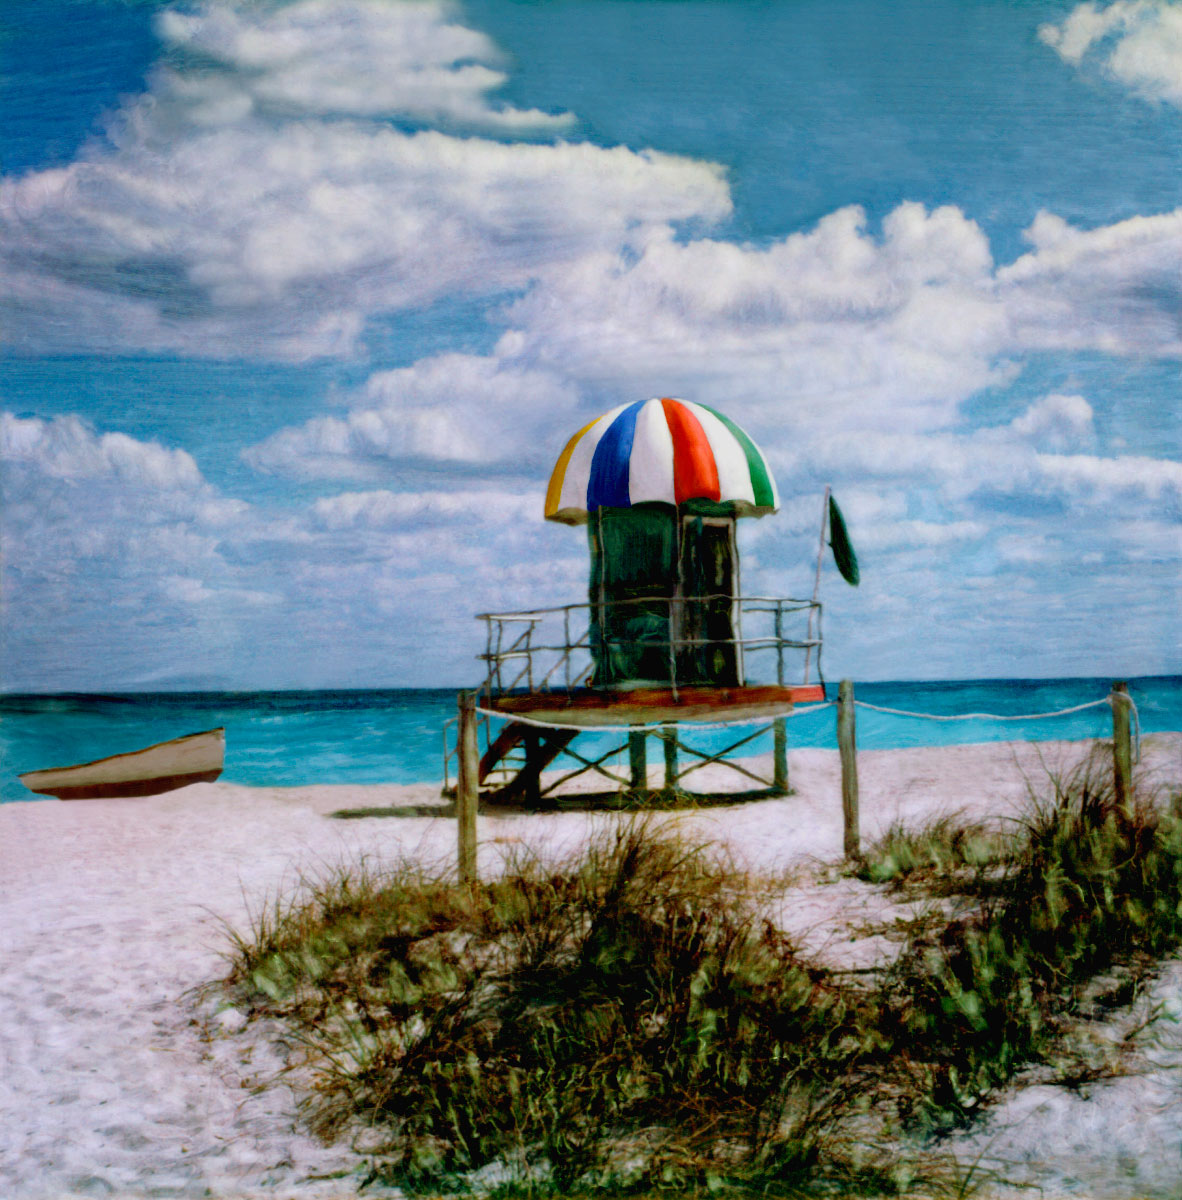 "Miami Beach Lifeguard Stand #11" <br> Seascape with Lifeguard Boat